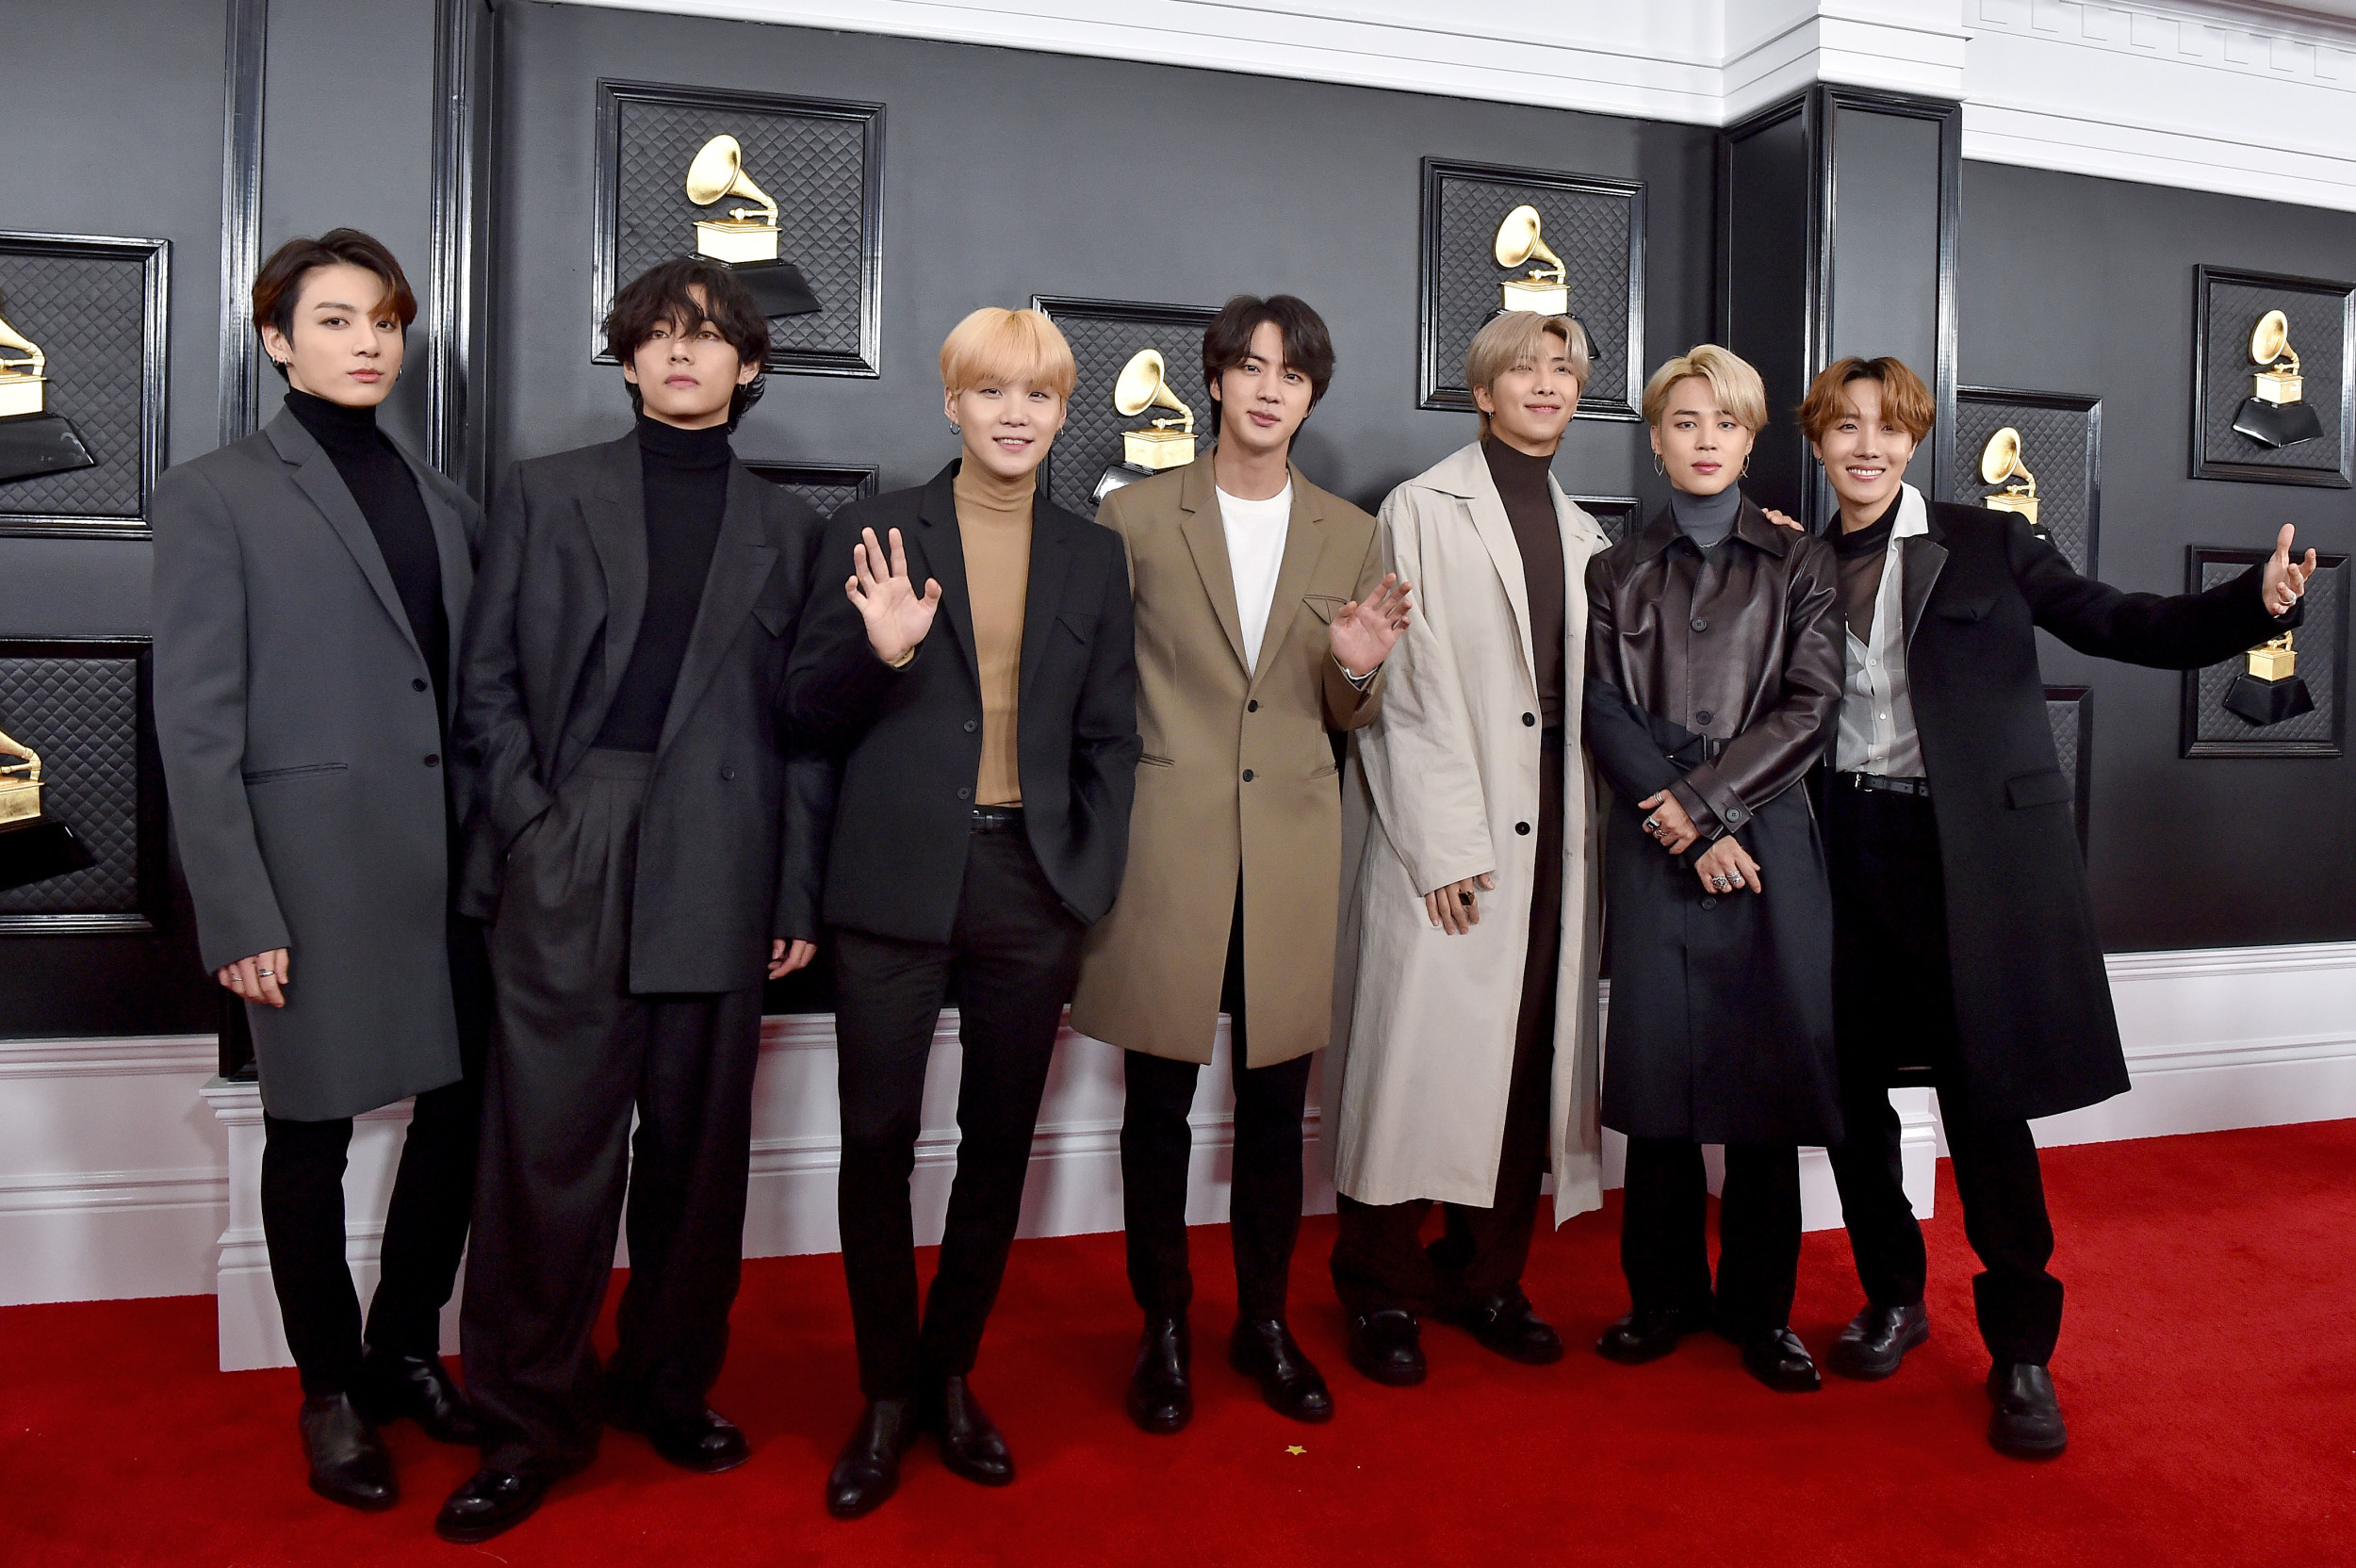 10 years of BTS: Five things to know about K-pop megastars - The